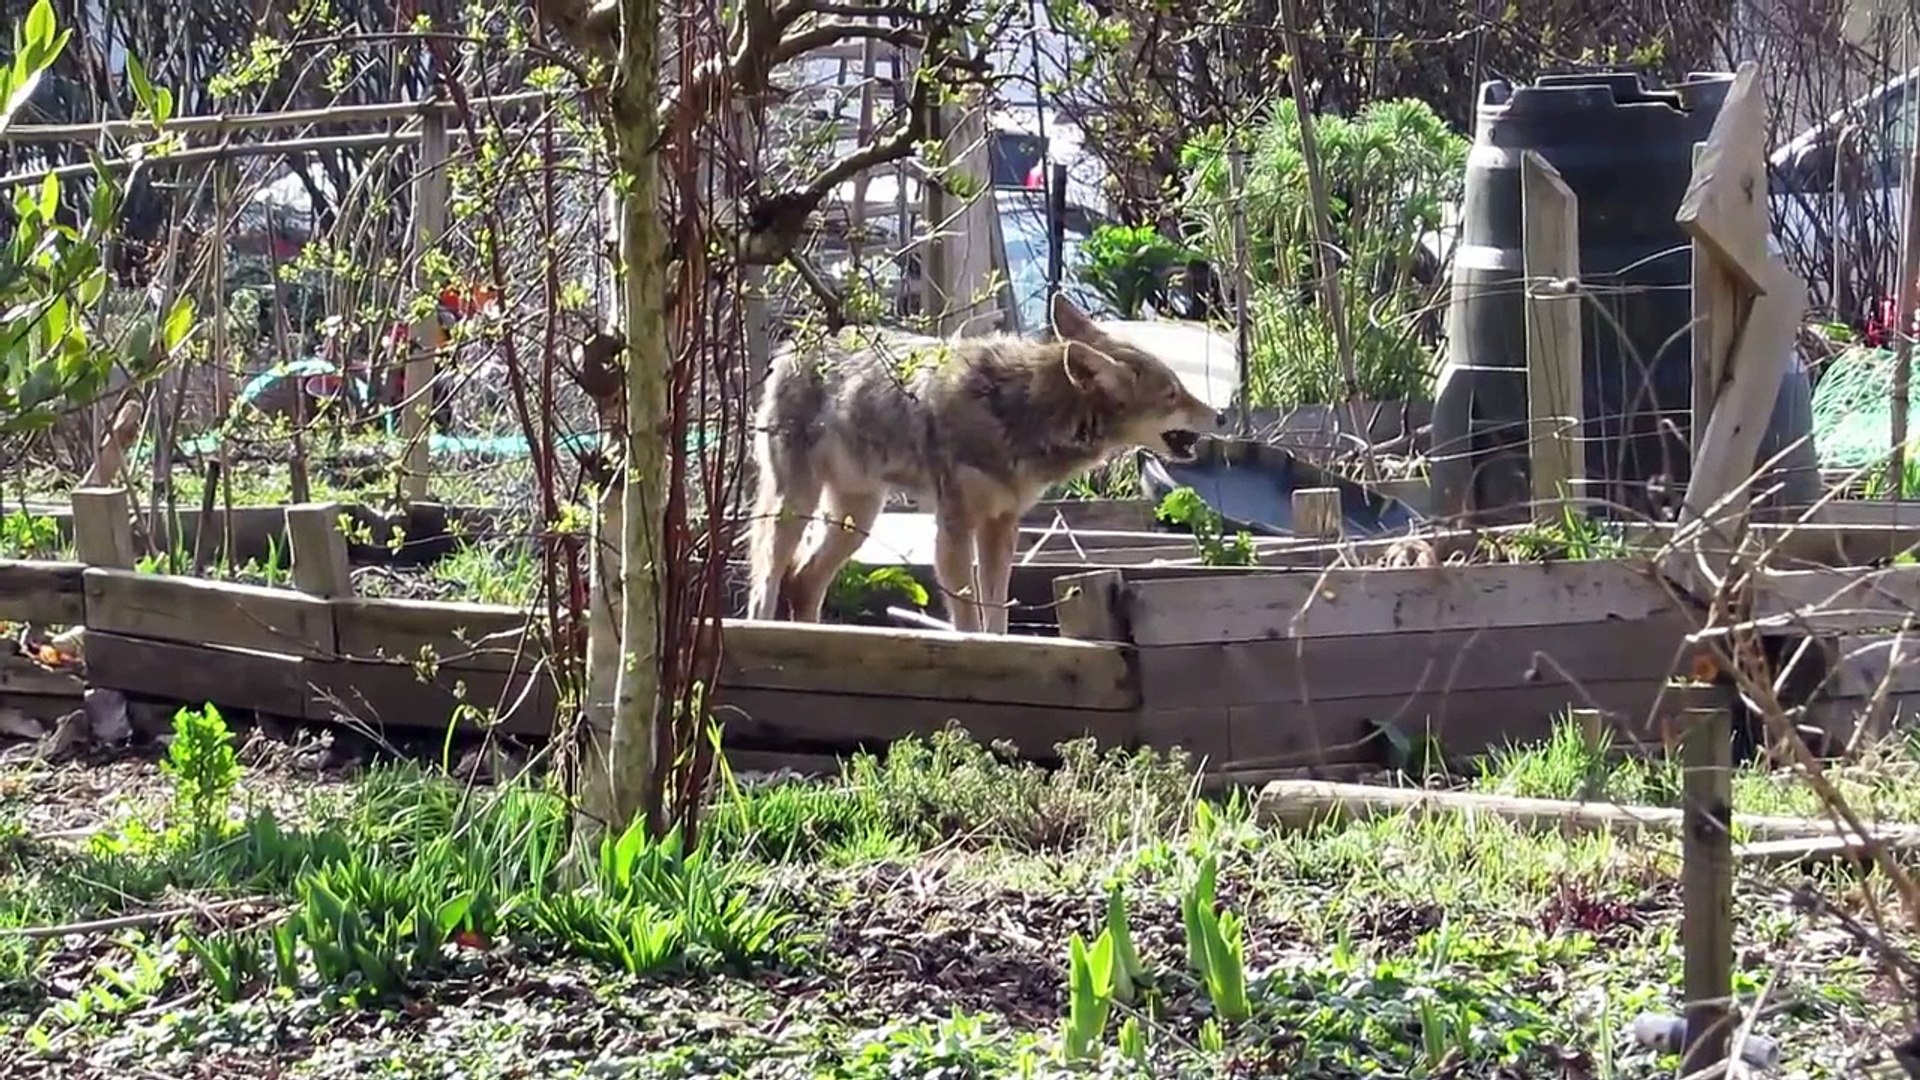 Why Coyotes Like City Gardens